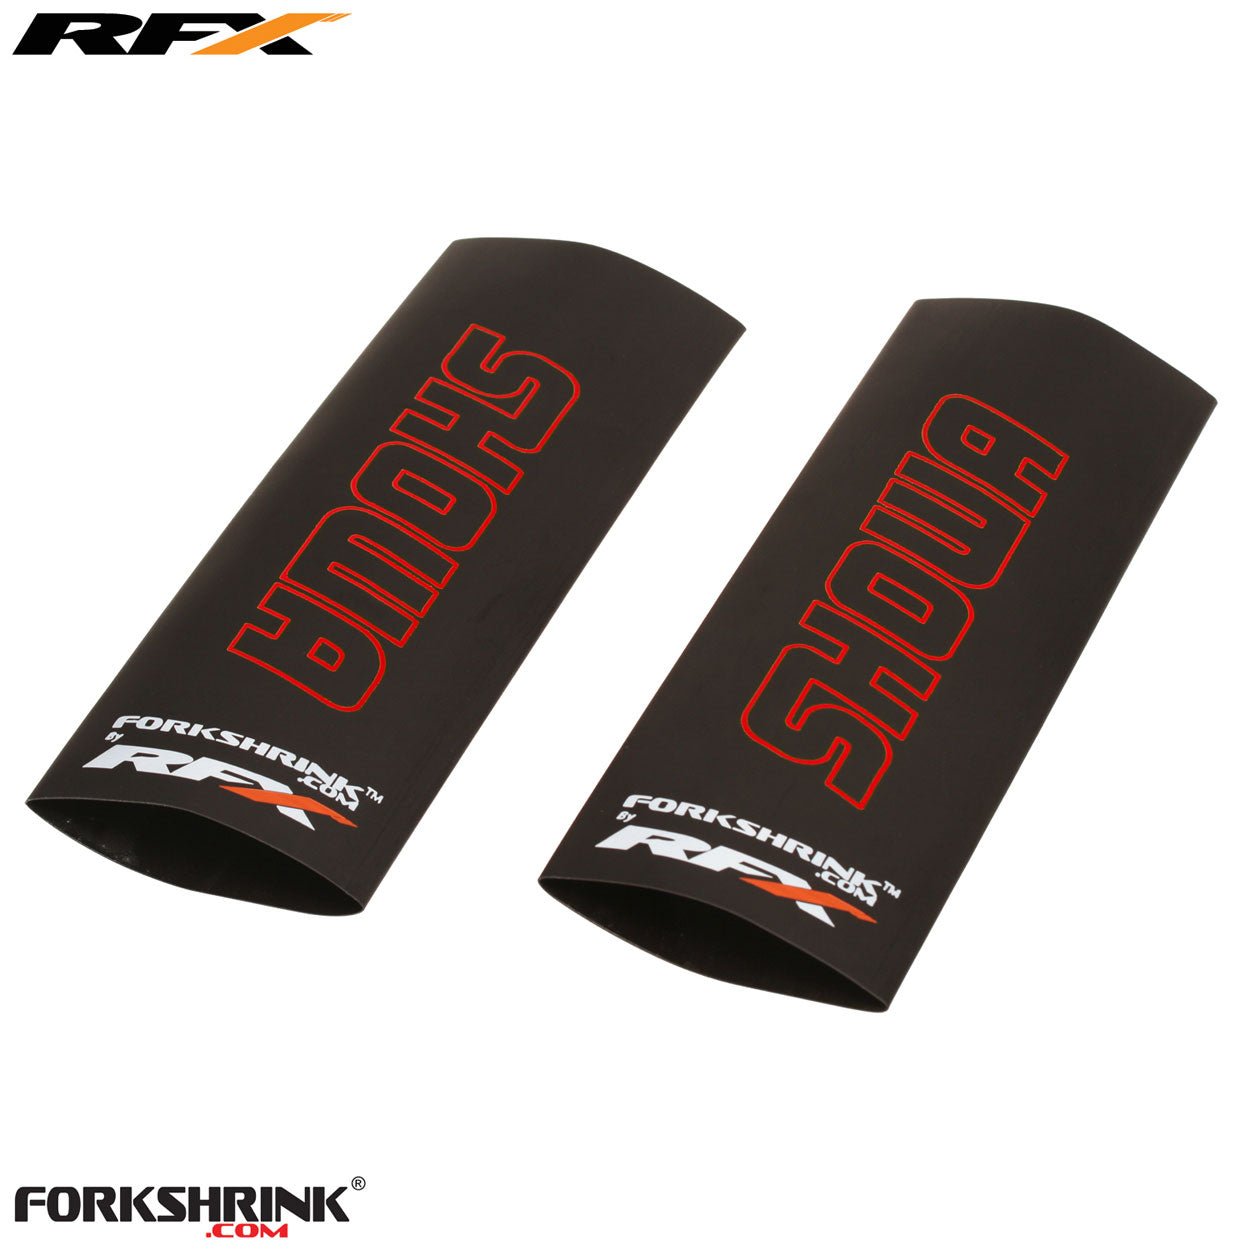 RFX Race Series Forkshrink Upper Fork Guard with Showa logo (Red) Universal 125cc-525cc - Red - RFX